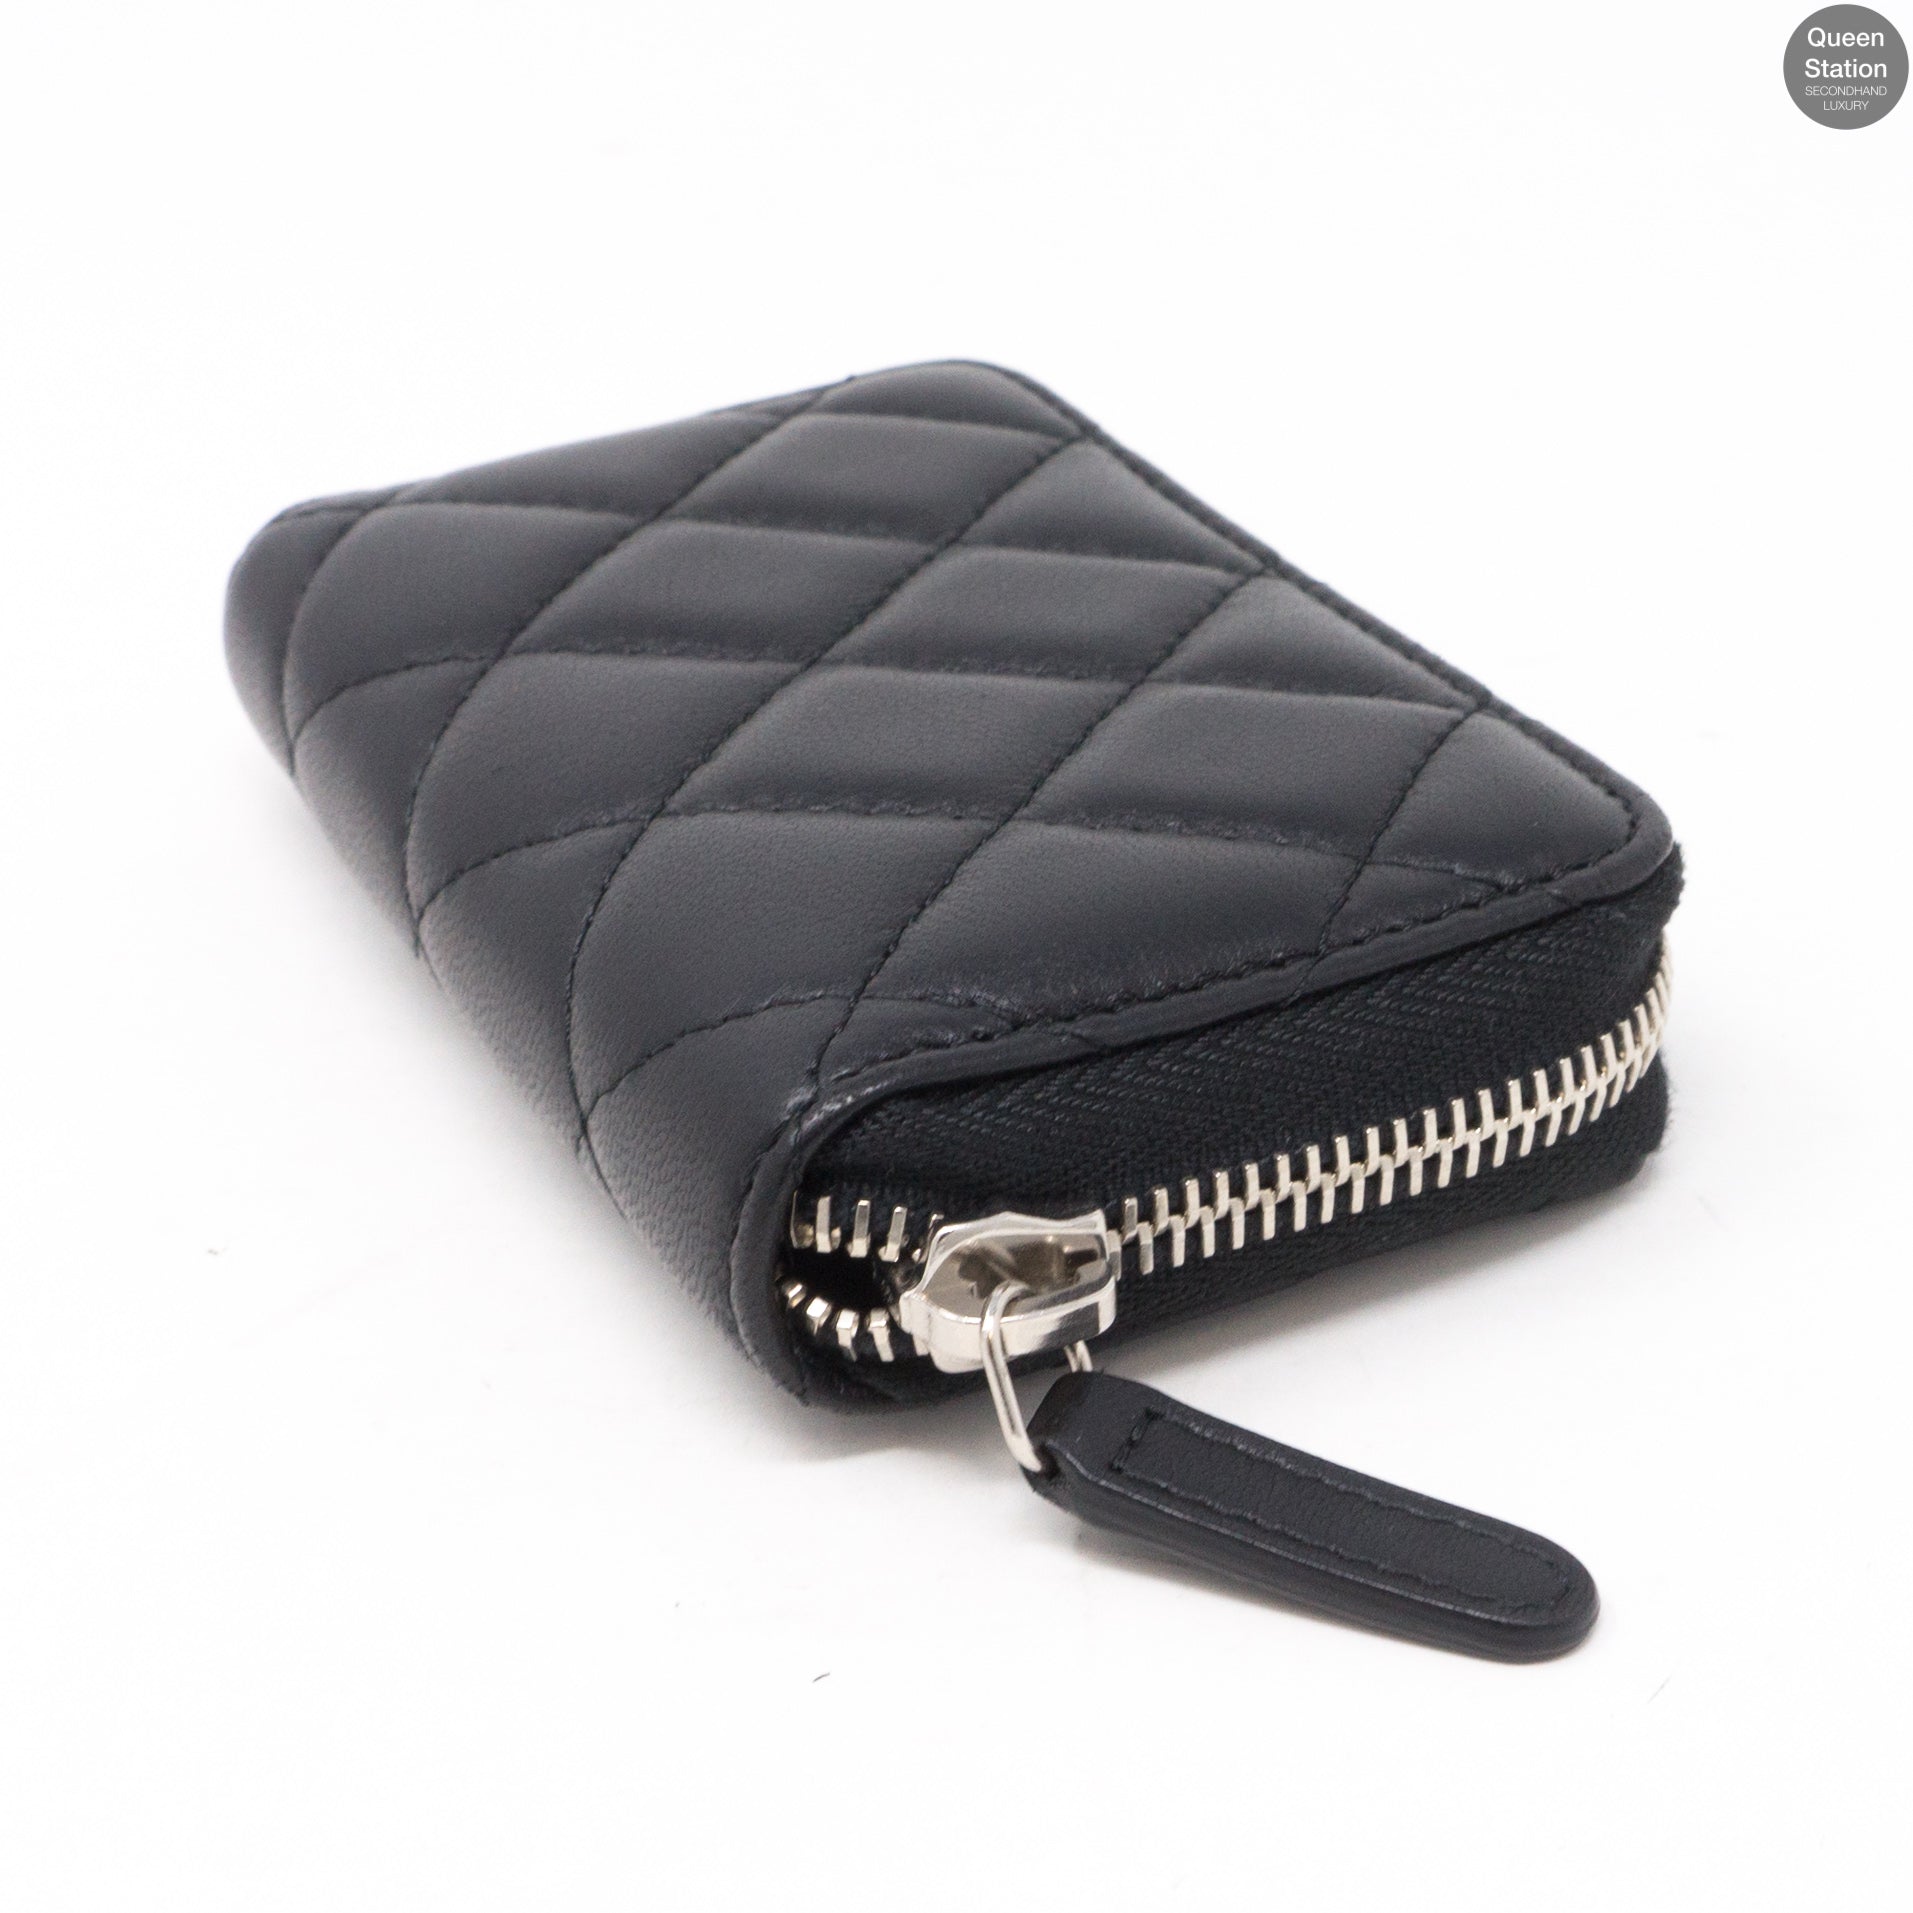 CHANEL Caviar Quilted Classic Zipped Coin Purse Black 1159563